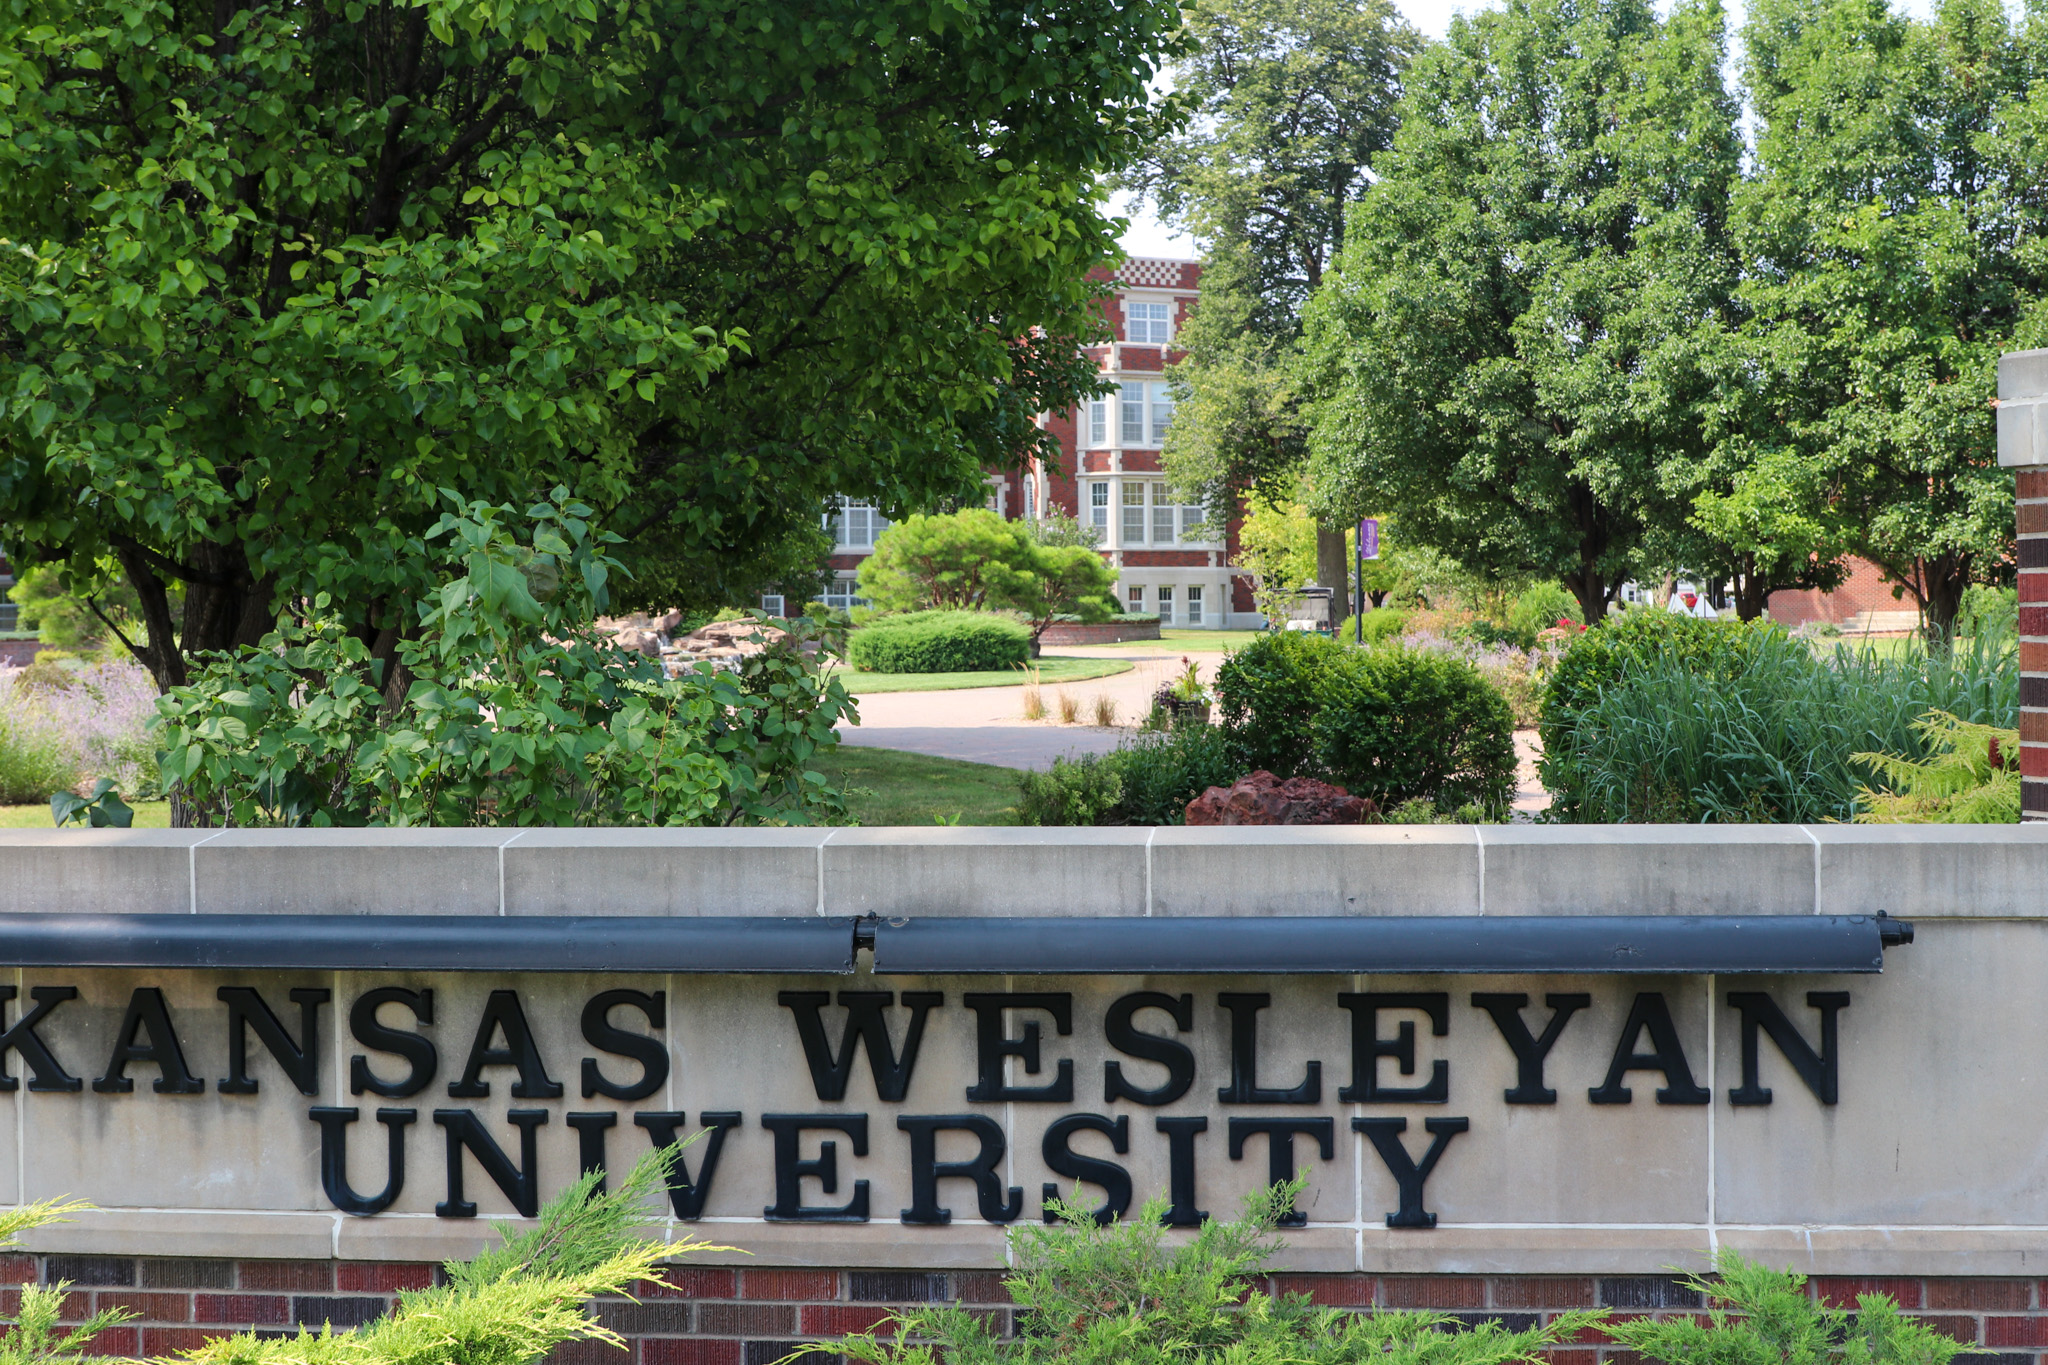 Campus sign, metal lettering